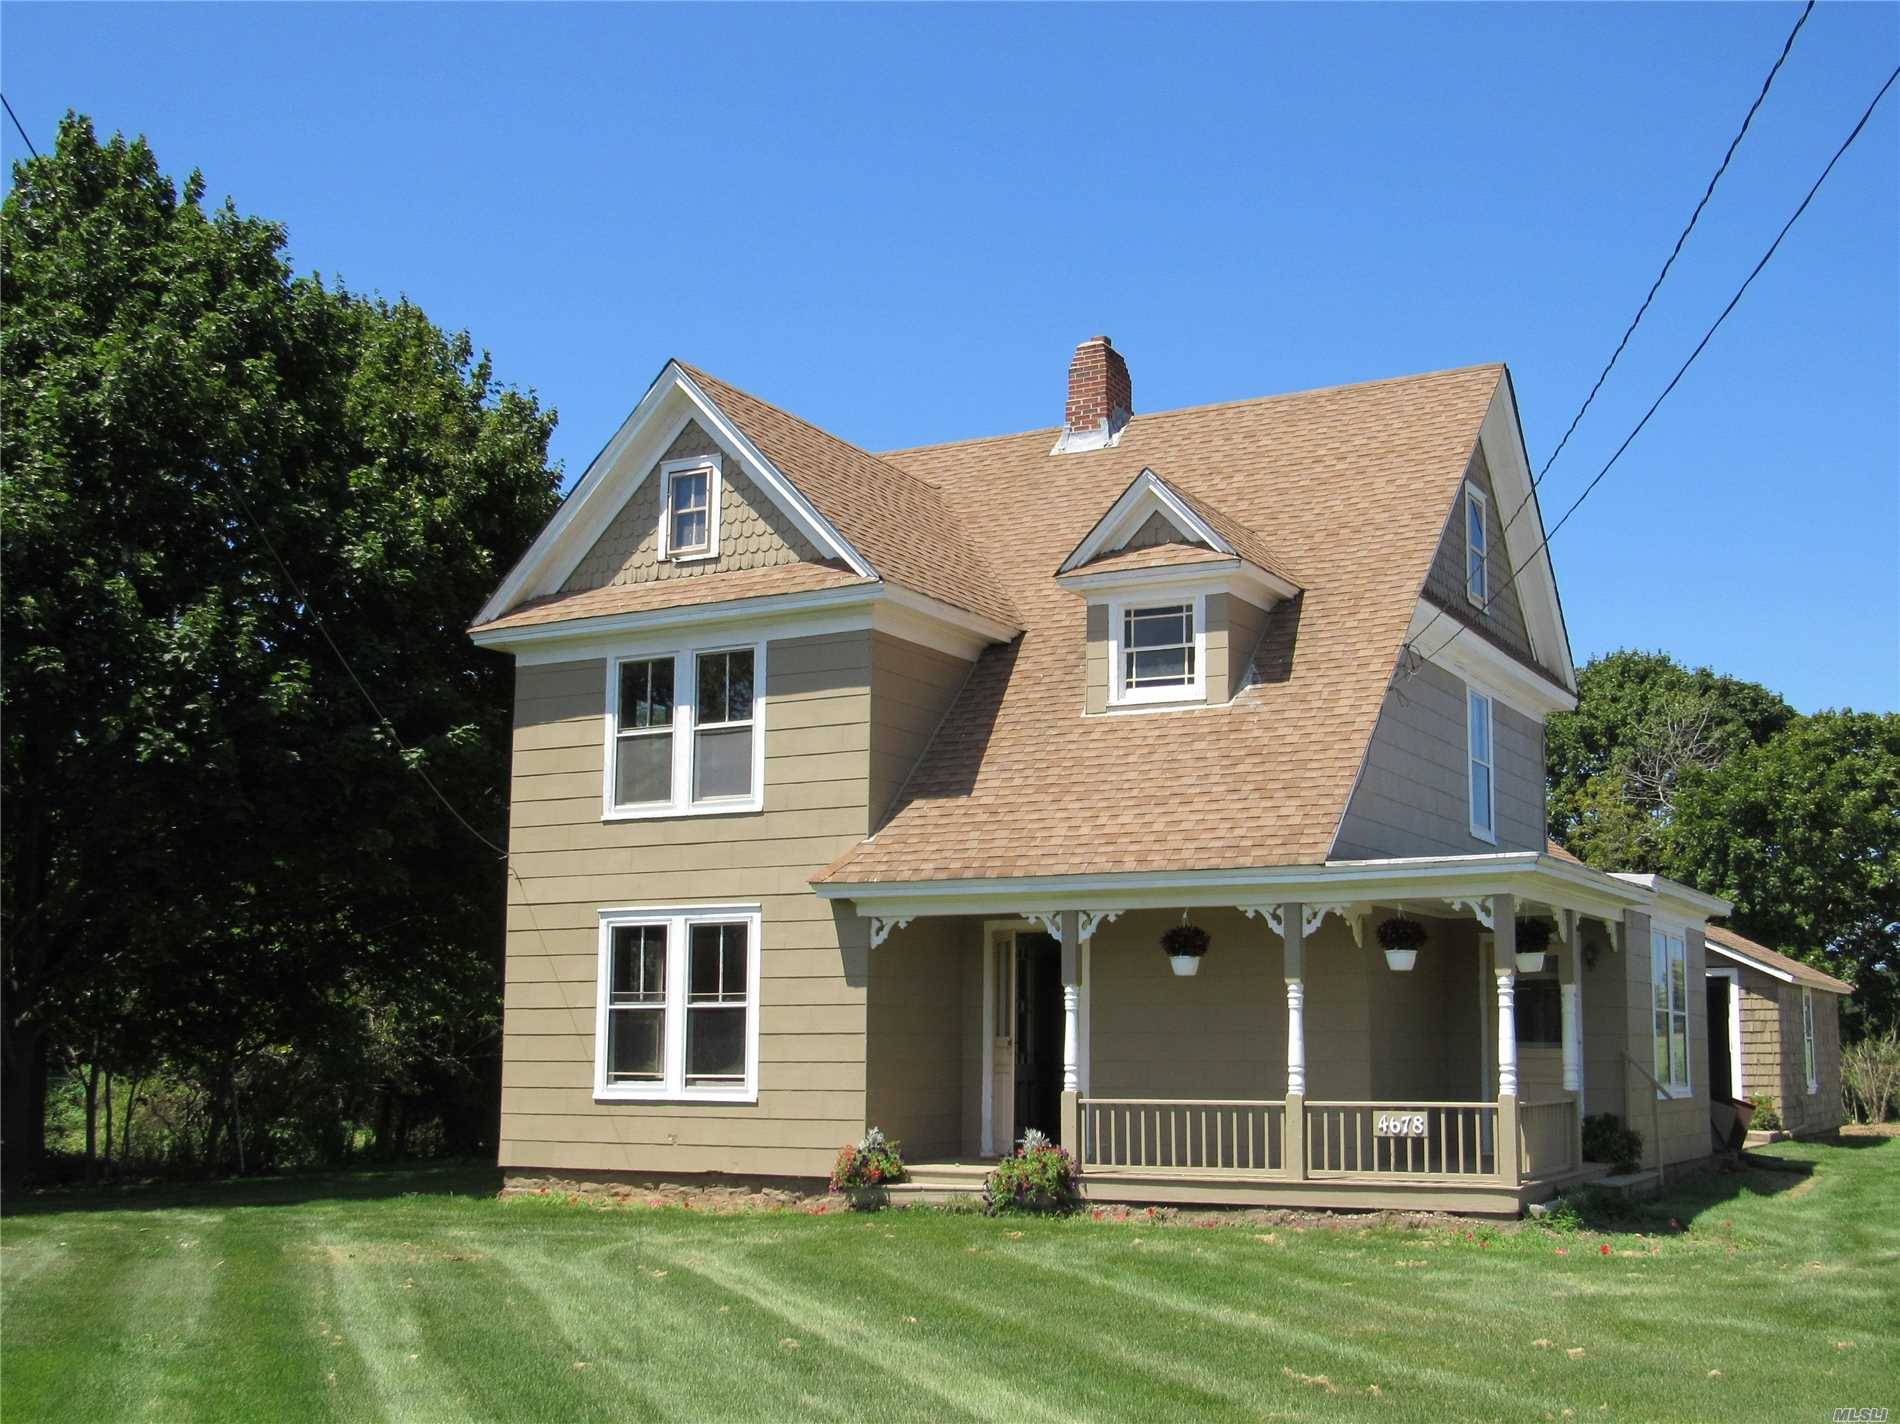 Country Charm Describes This Turn  Of The Century Farmhouse.